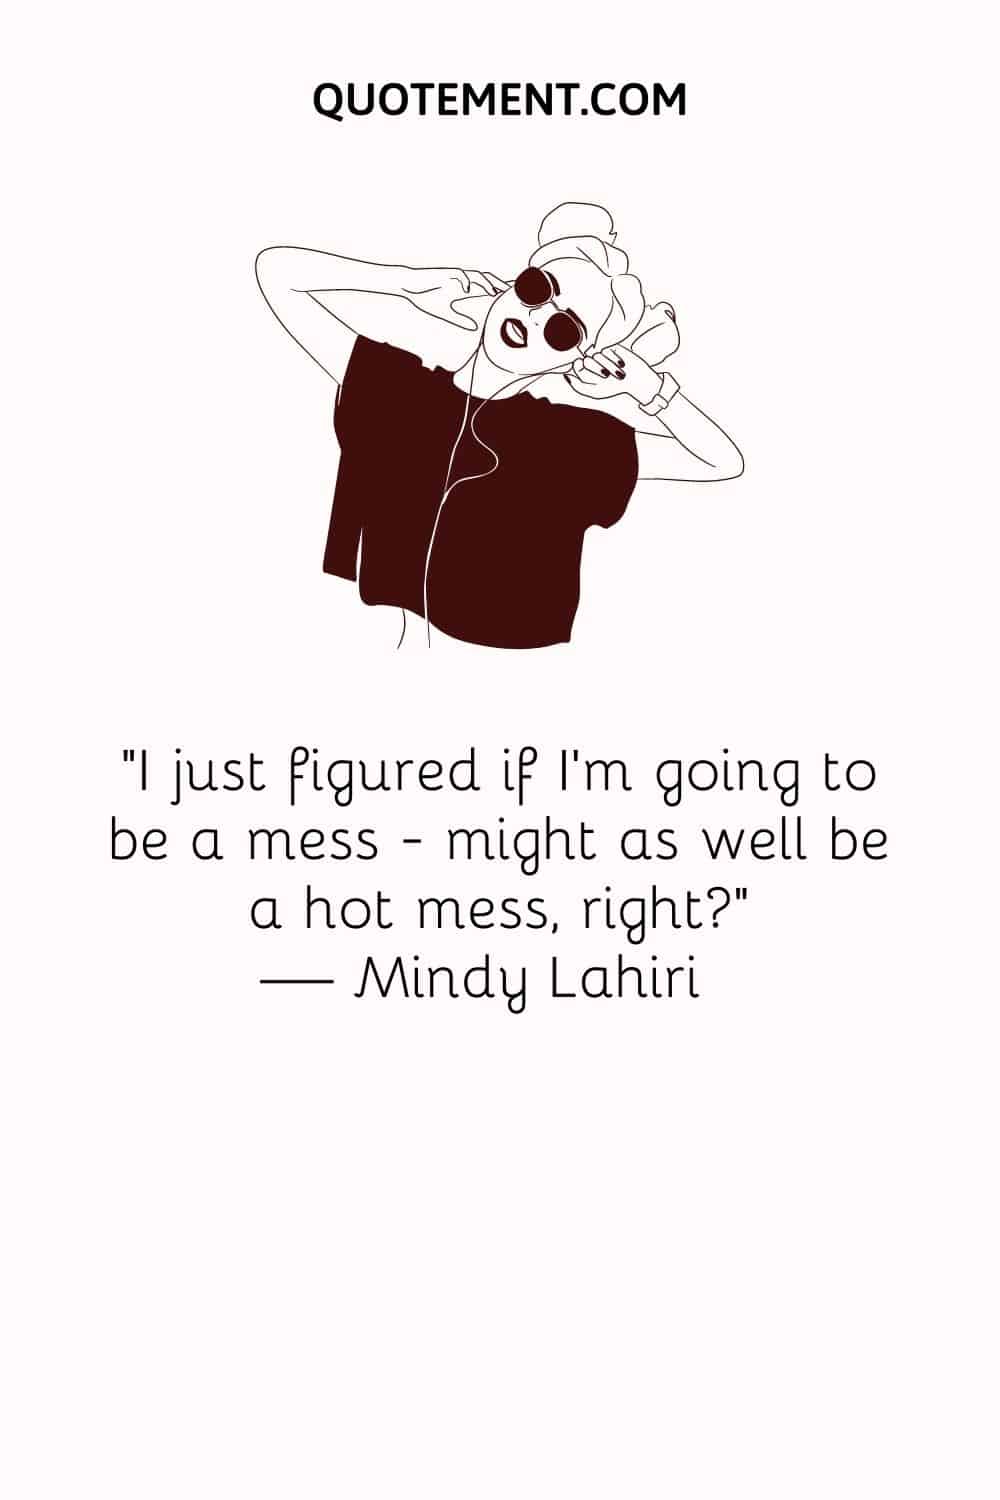 “I just figured if I’m going to be a mess — might as well be a hot mess, right” — Mindy Lahiri